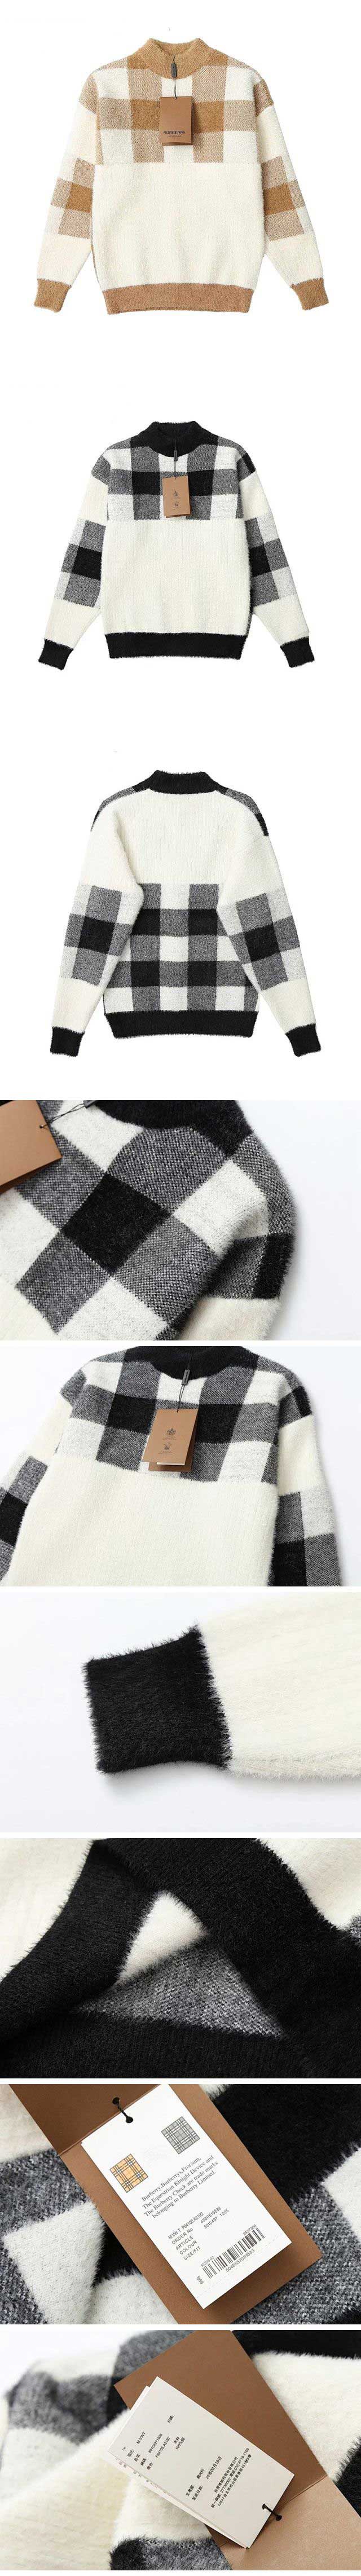 Burberry 23SS Classic Plaid Knitted バーバリー 23SS クラシック チェック ニット